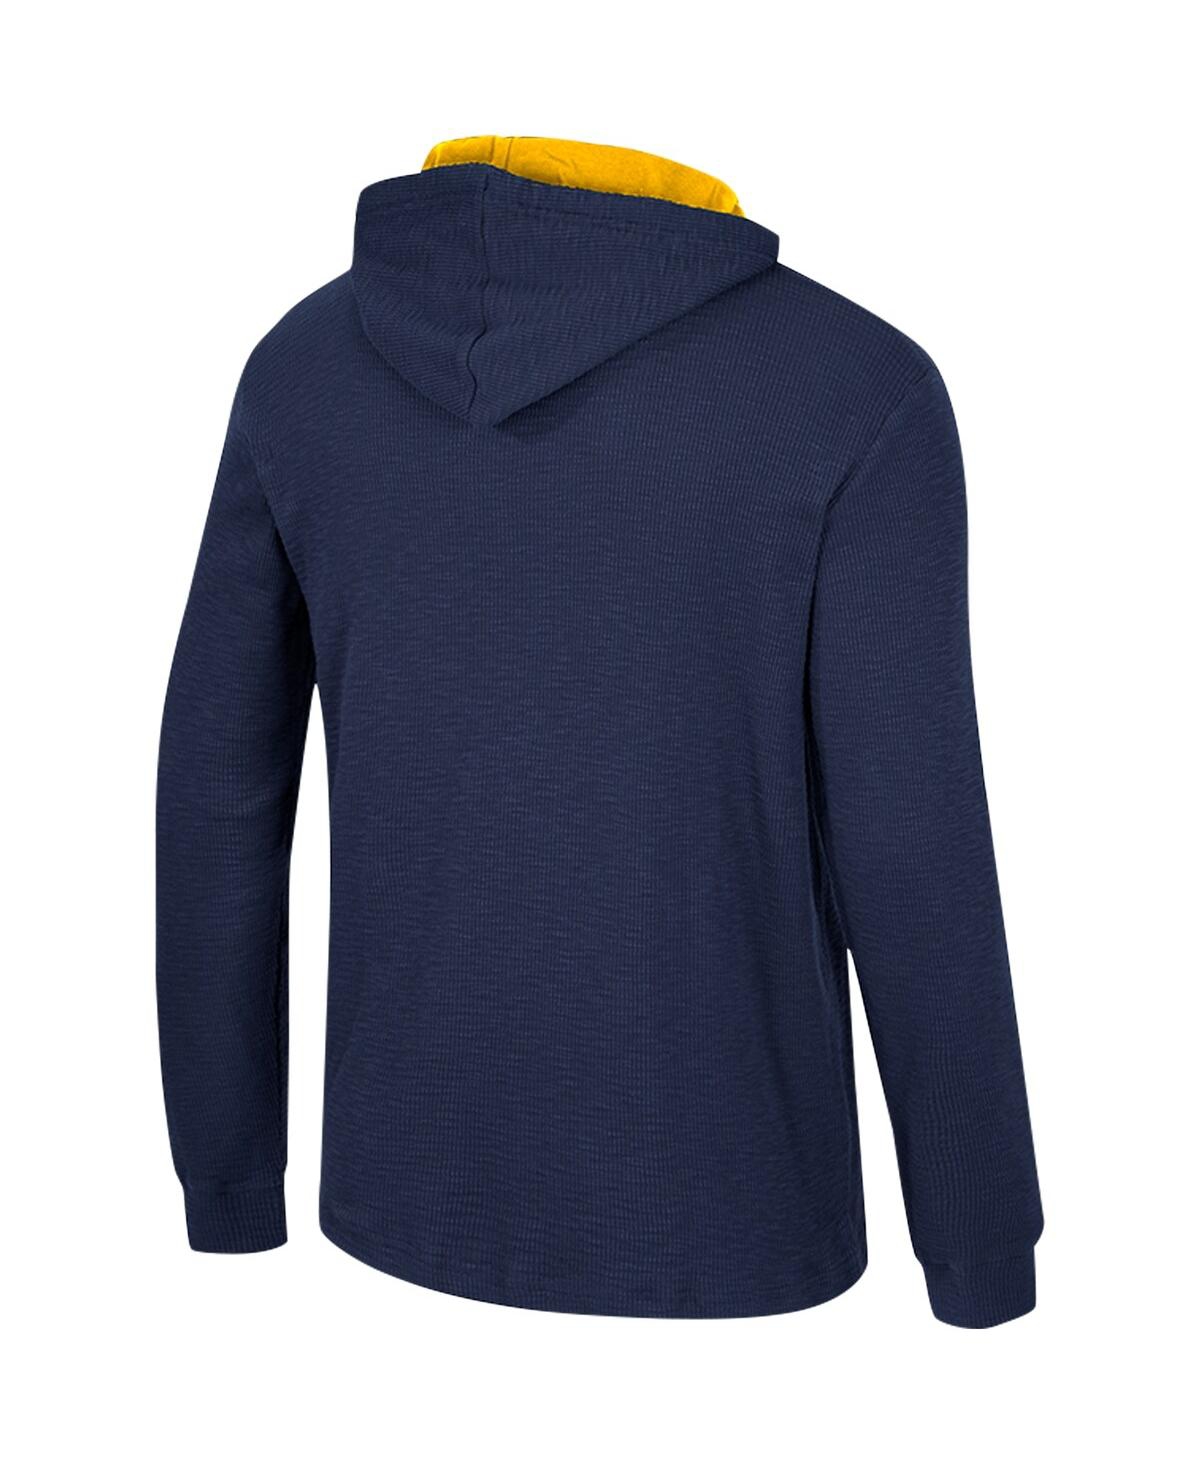 Shop Colosseum Men's  Navy Michigan Wolverines Affirmative Thermal Hoodie Long Sleeve T-shirt